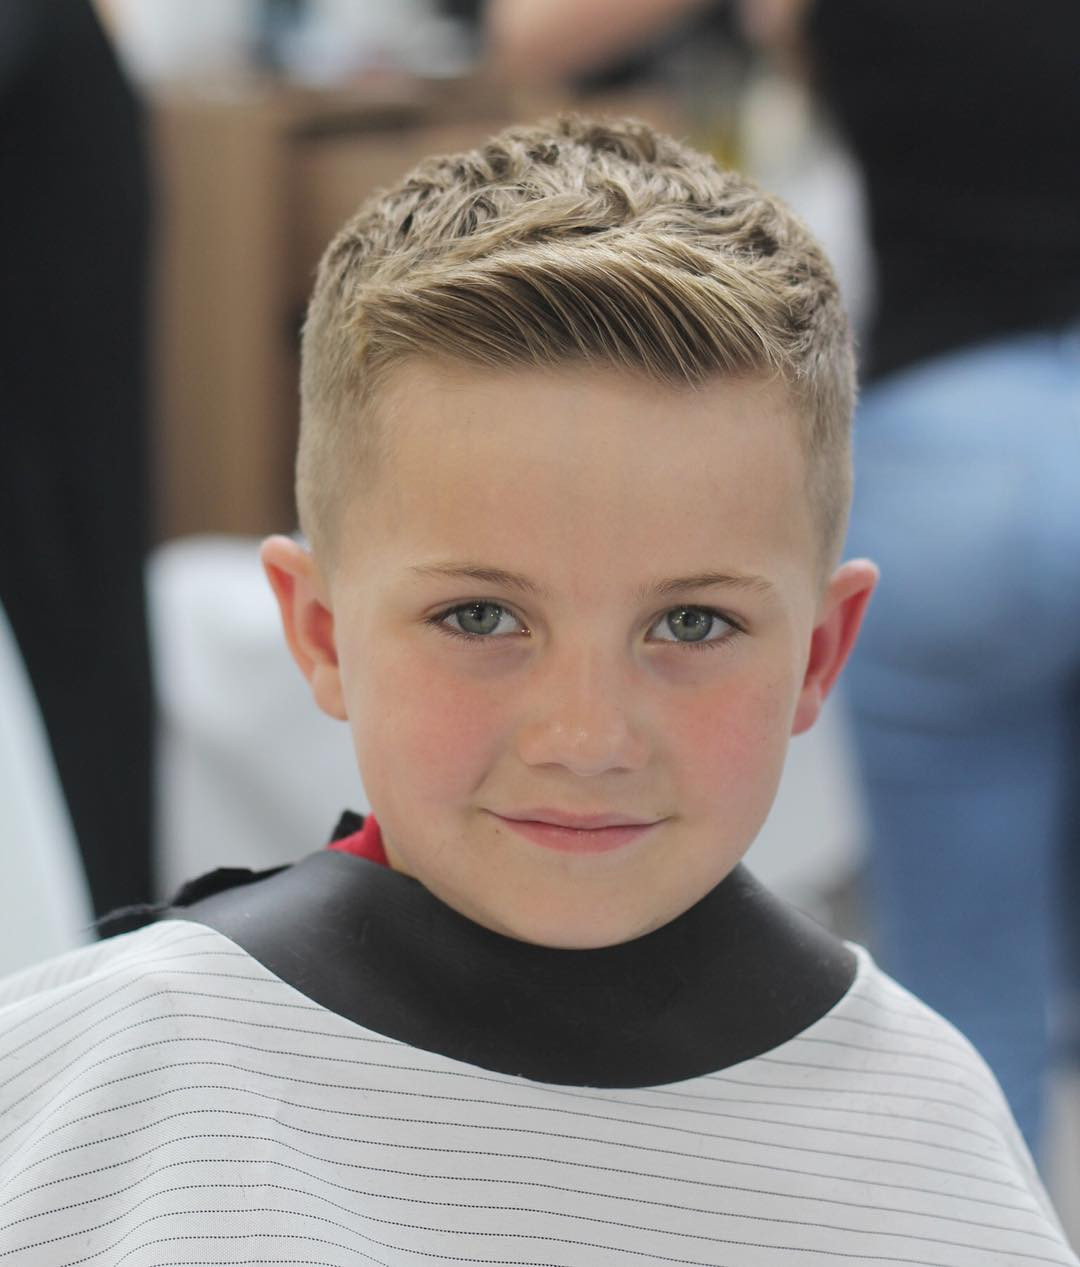 Hairstyles Boys 2019
 Best 34 Gorgeous Kids Boys Haircuts for 2019